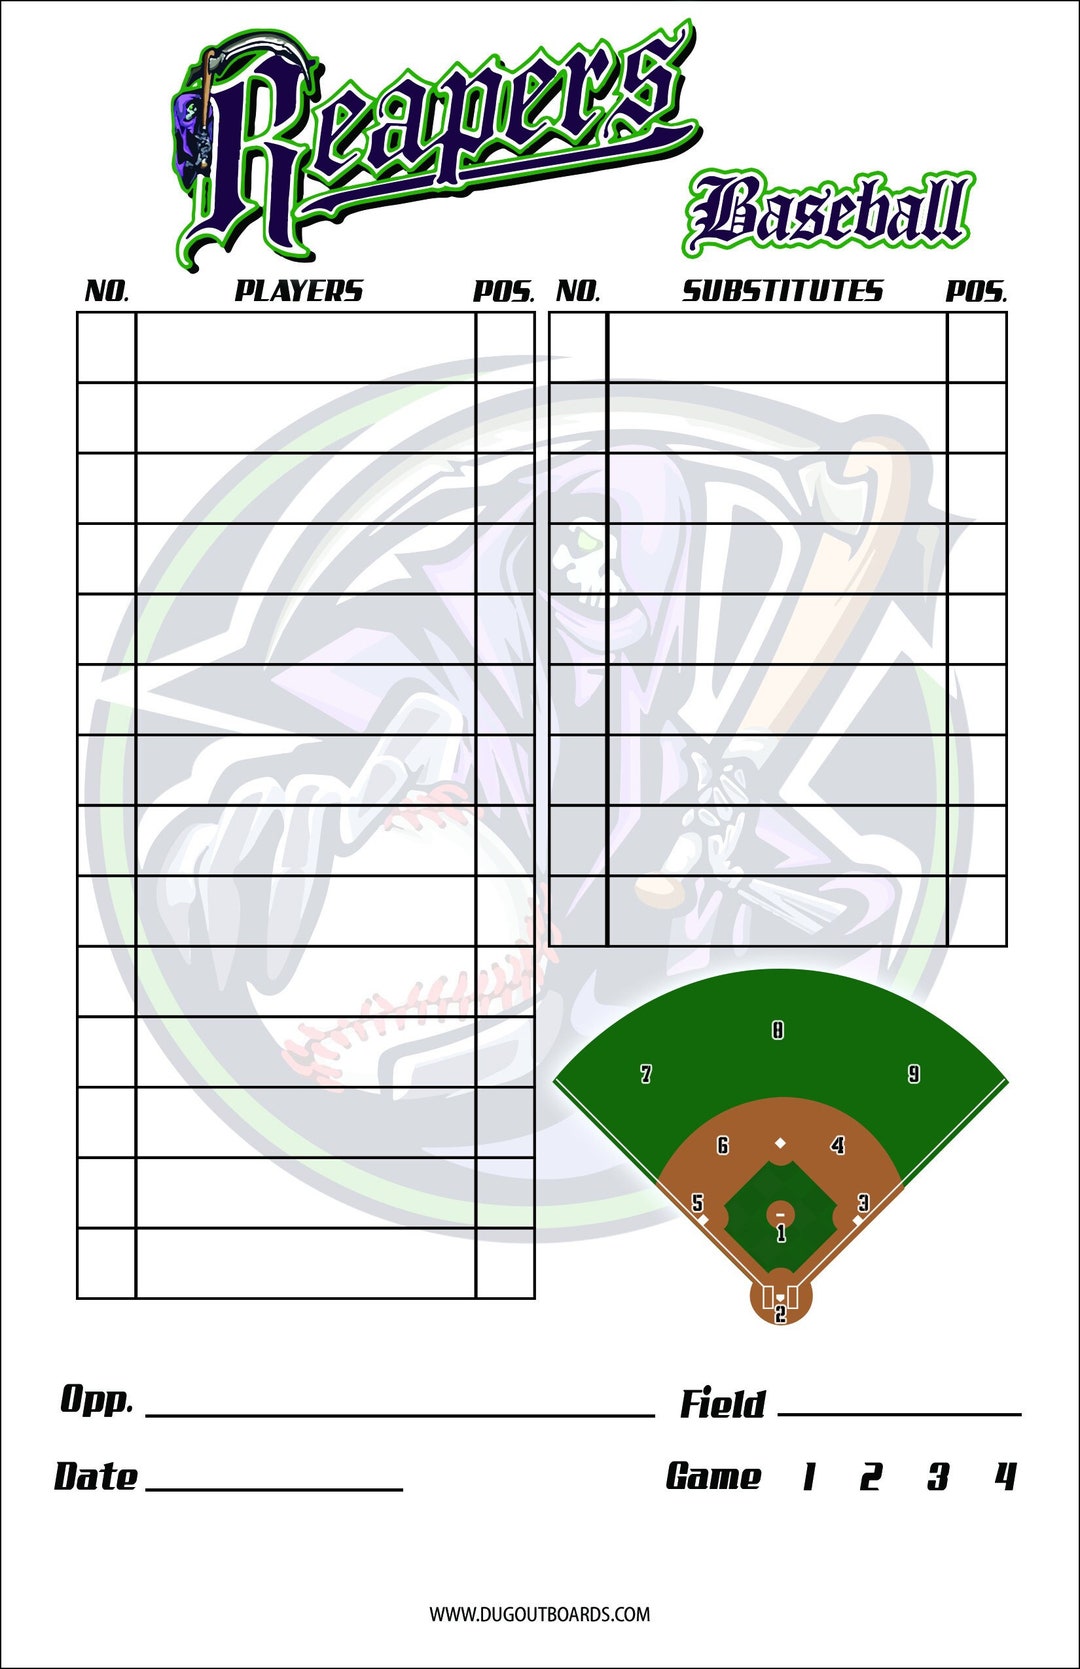 Magnetic MLB Team Schedules  Order Customizable Baseball Team Schedule  Magnets With Peel-and-Stick Business Cards from